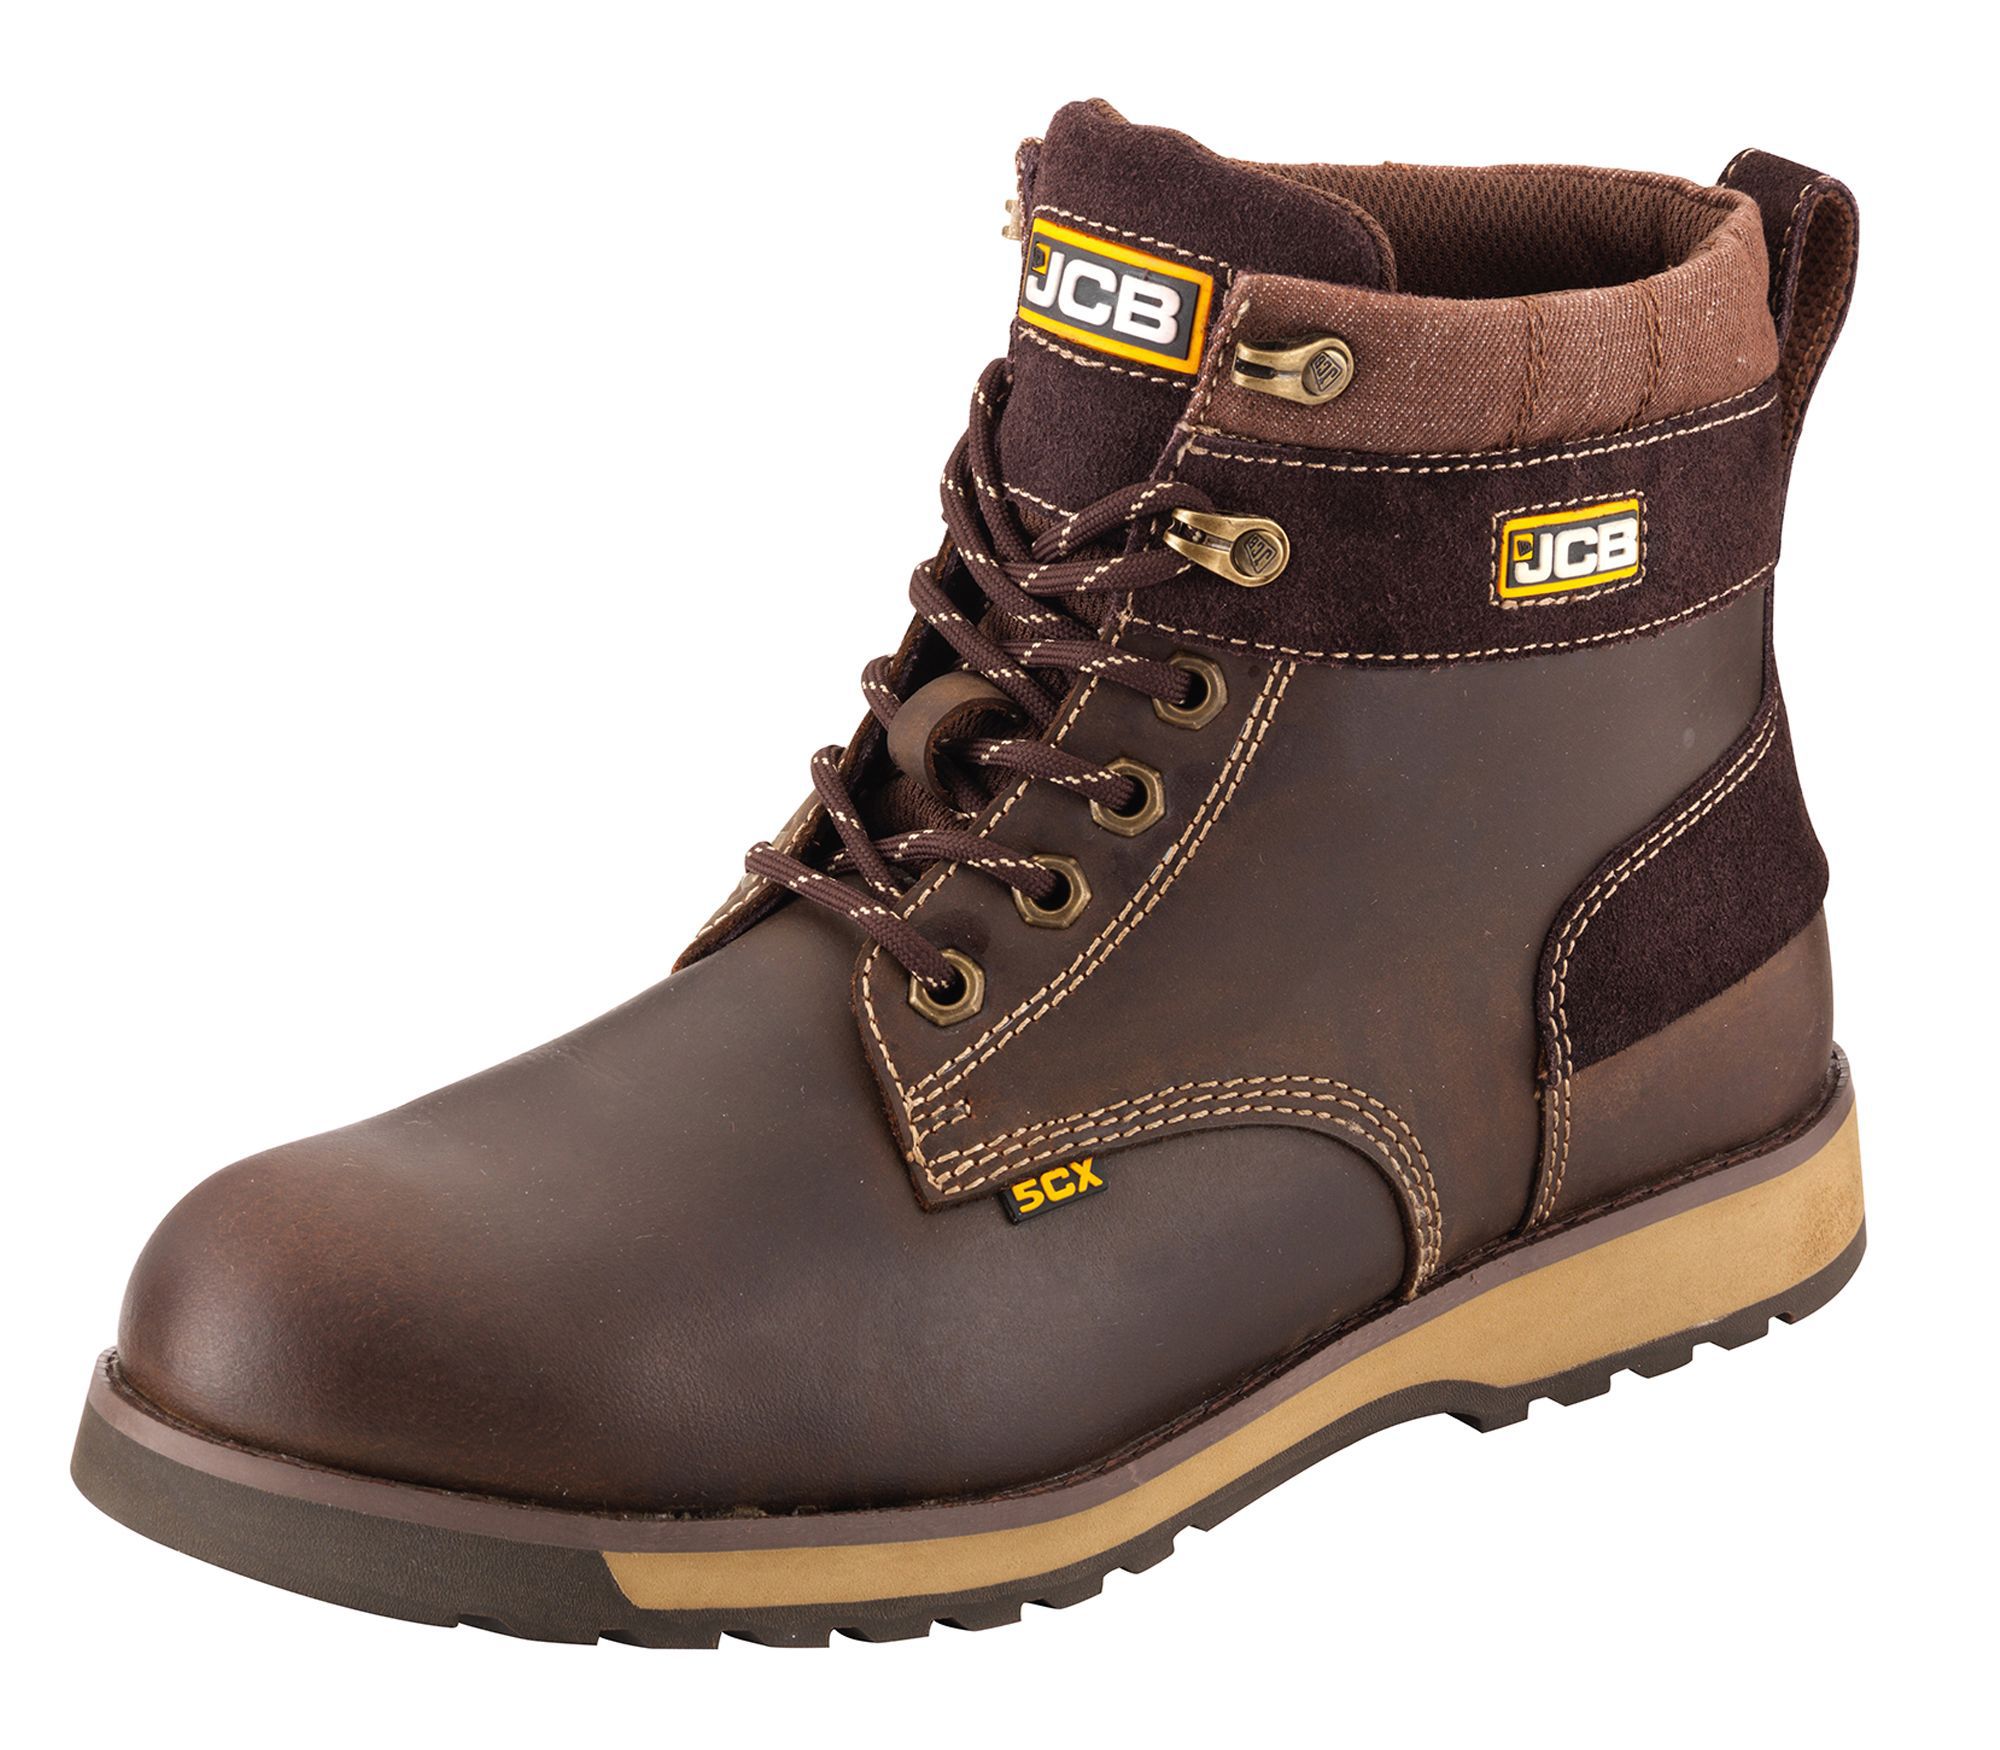 JCB 5CX Brown Safety boots, Size 12